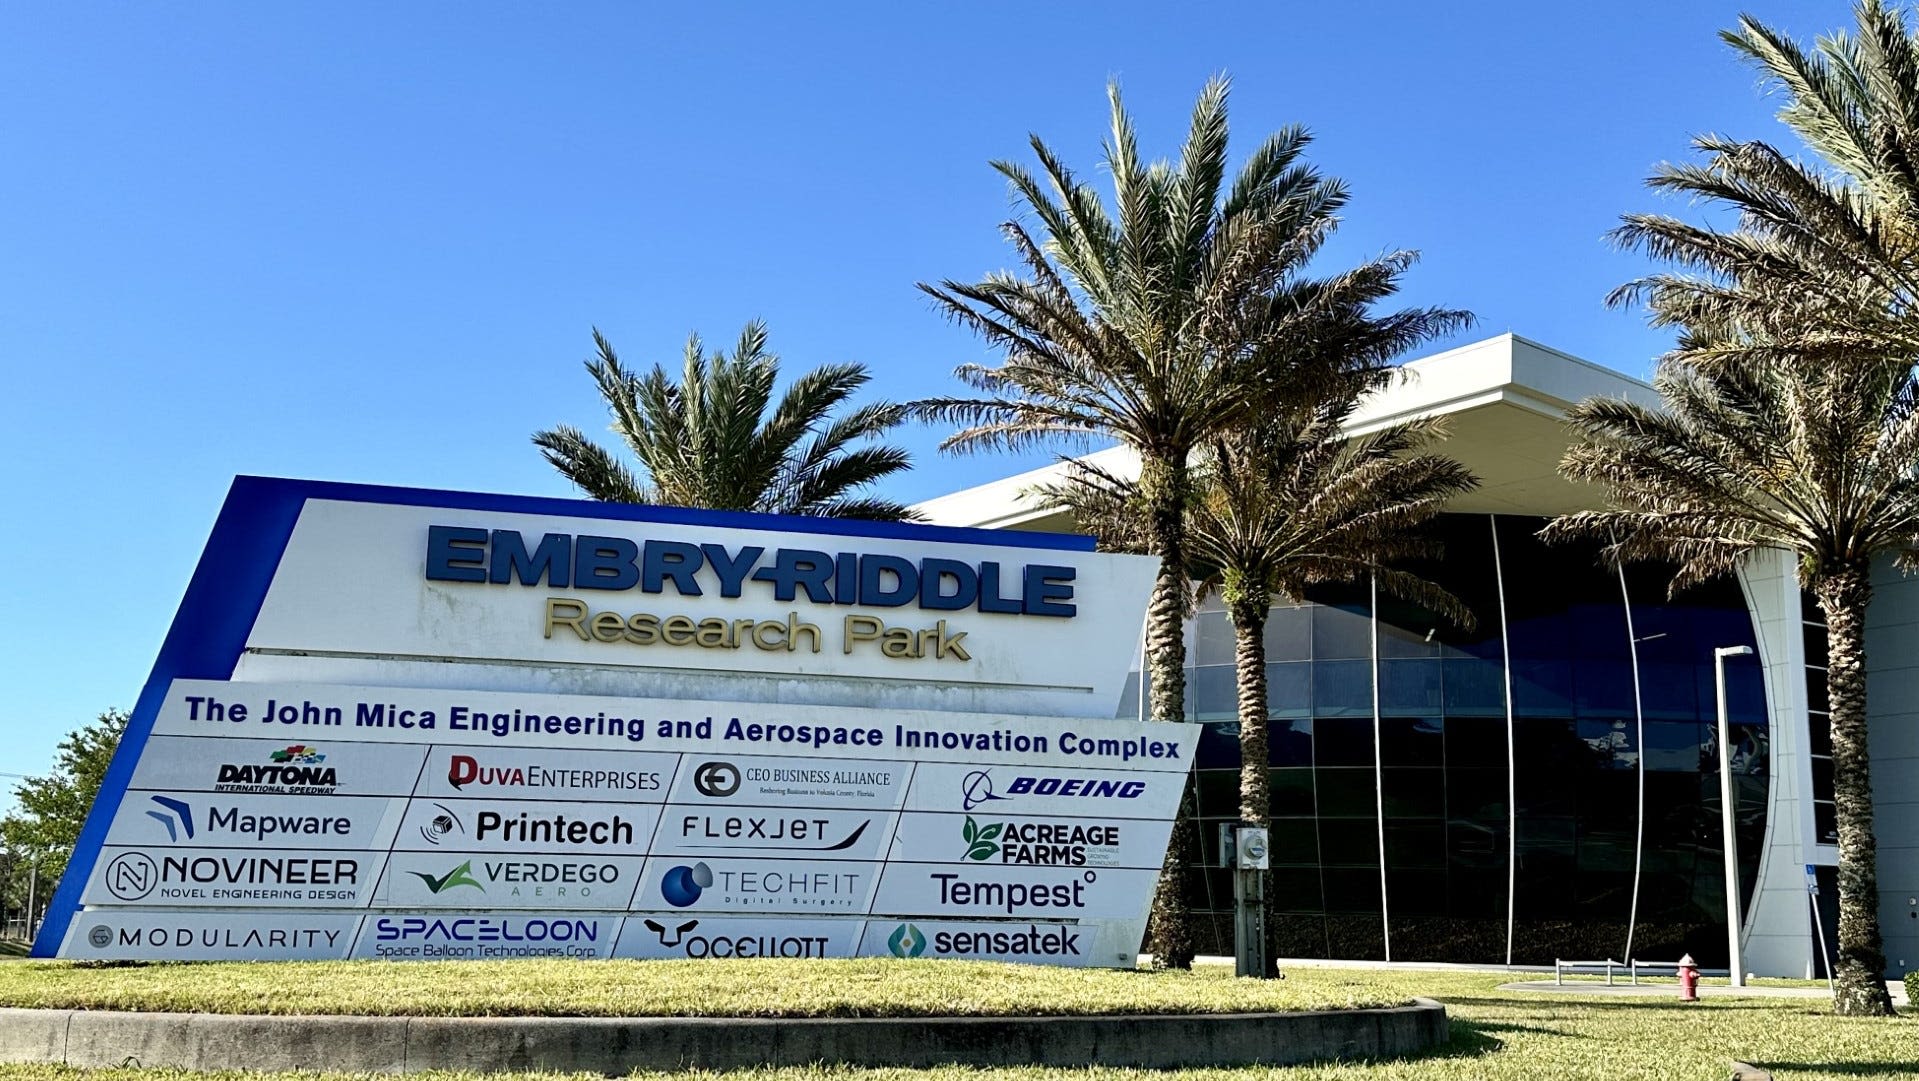 Lawmakers put up $26 million to fund 'bleeding edge' hypersonic research at Embry-Riddle